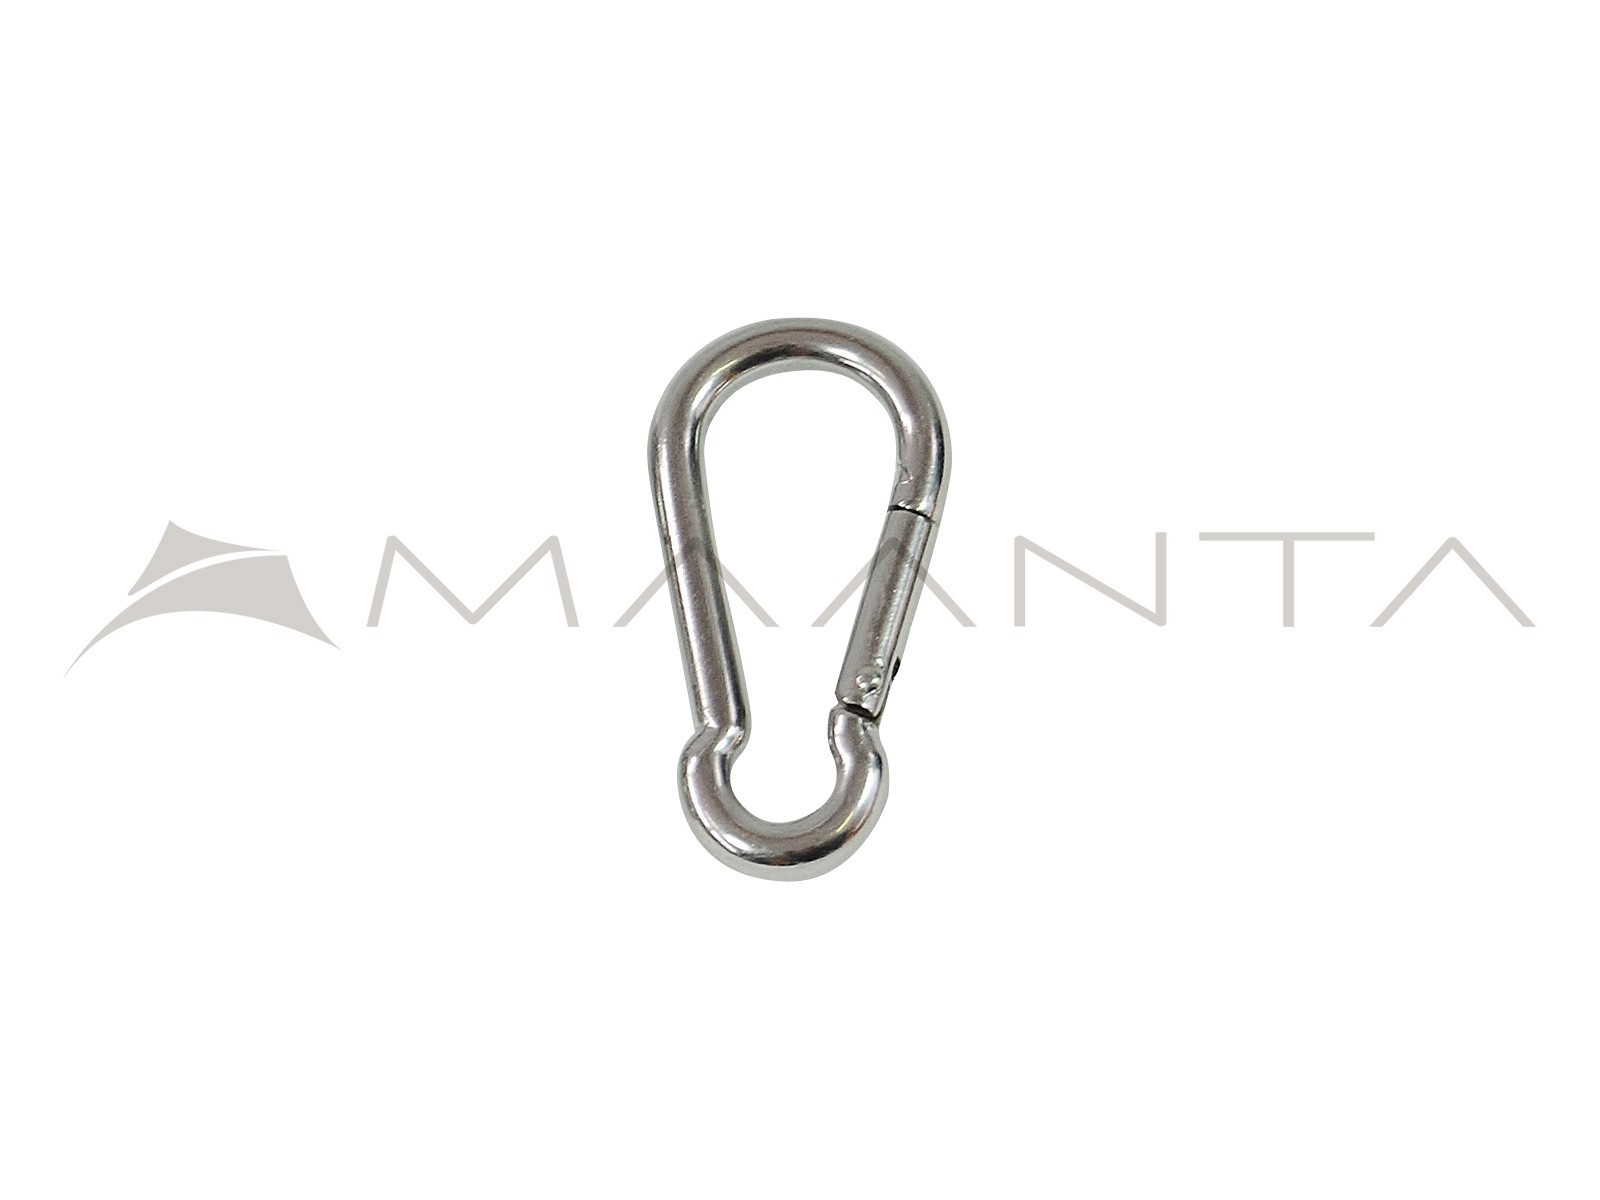 6mm Safety Snap Hook Galvanized Carabiner Climbing Snap Hook Out Door